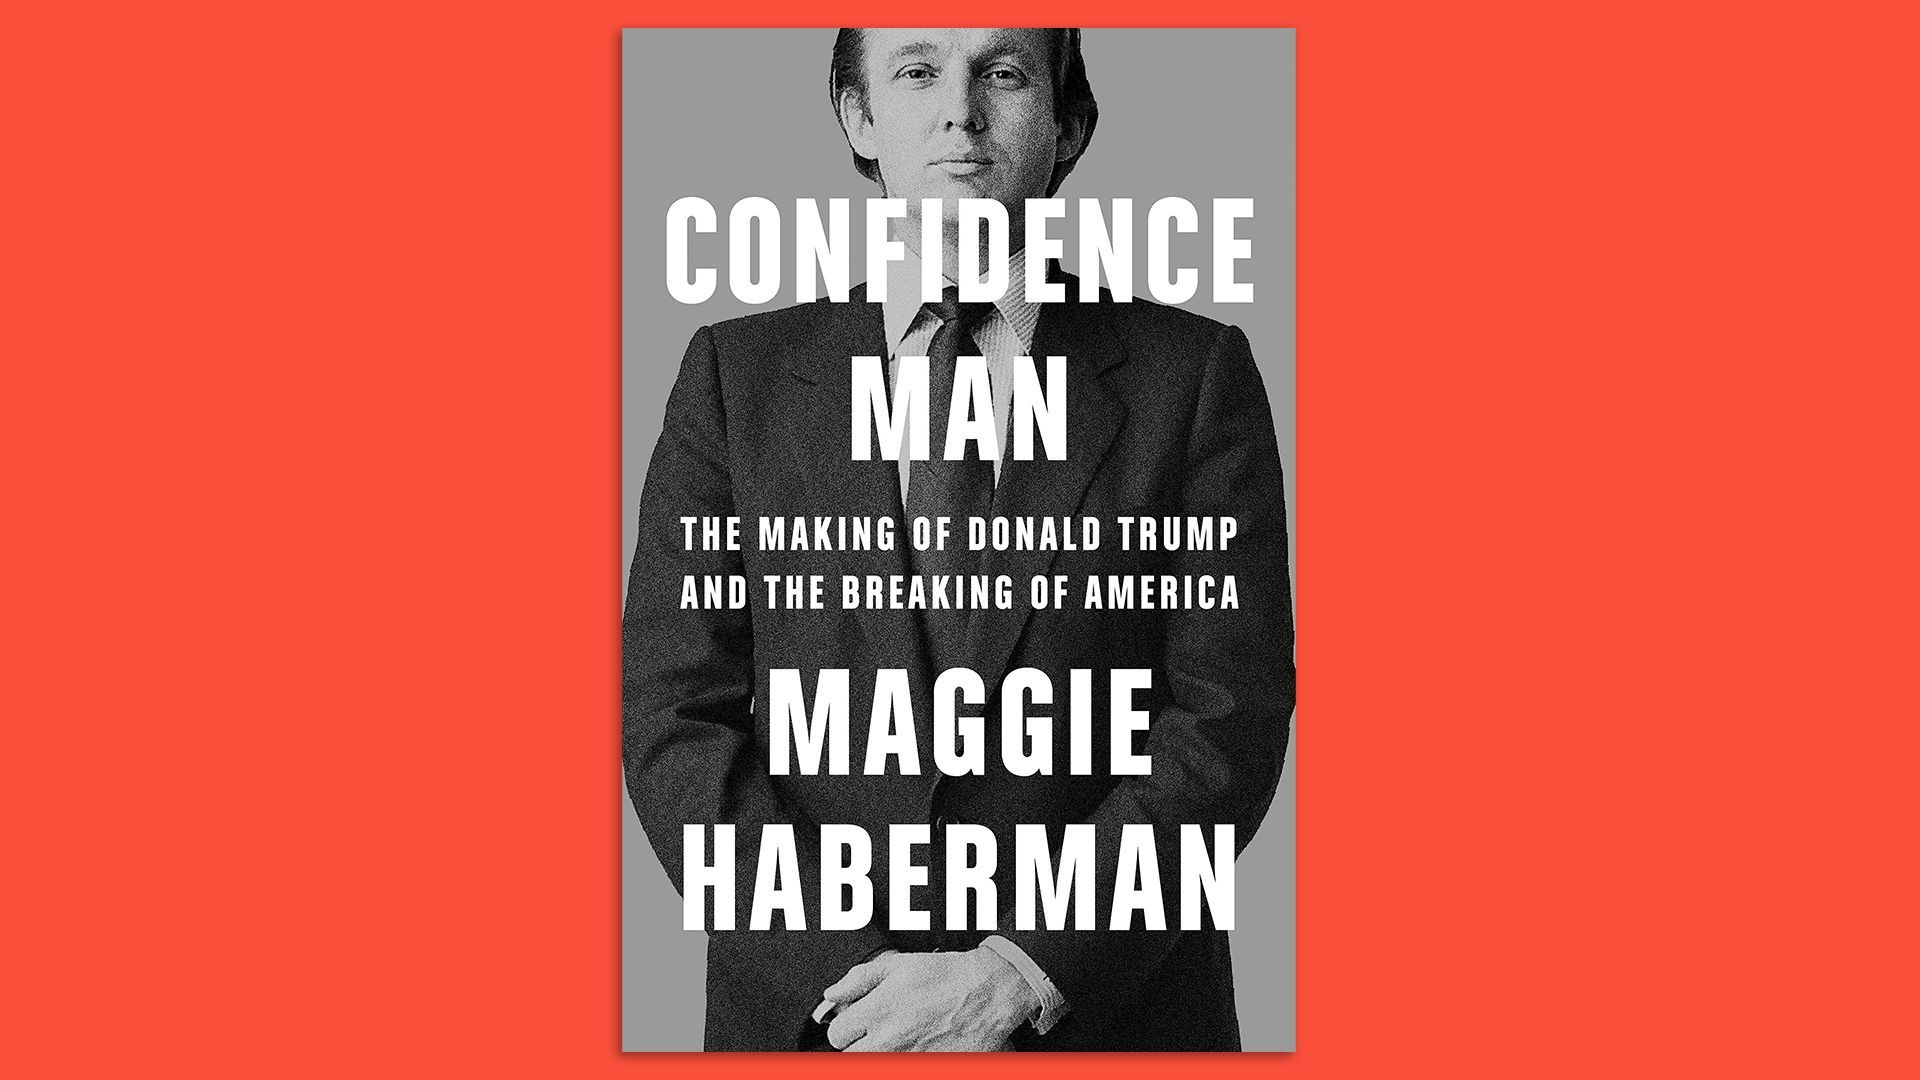 The cover of Maggie Haberman's book, "Confidence Man"